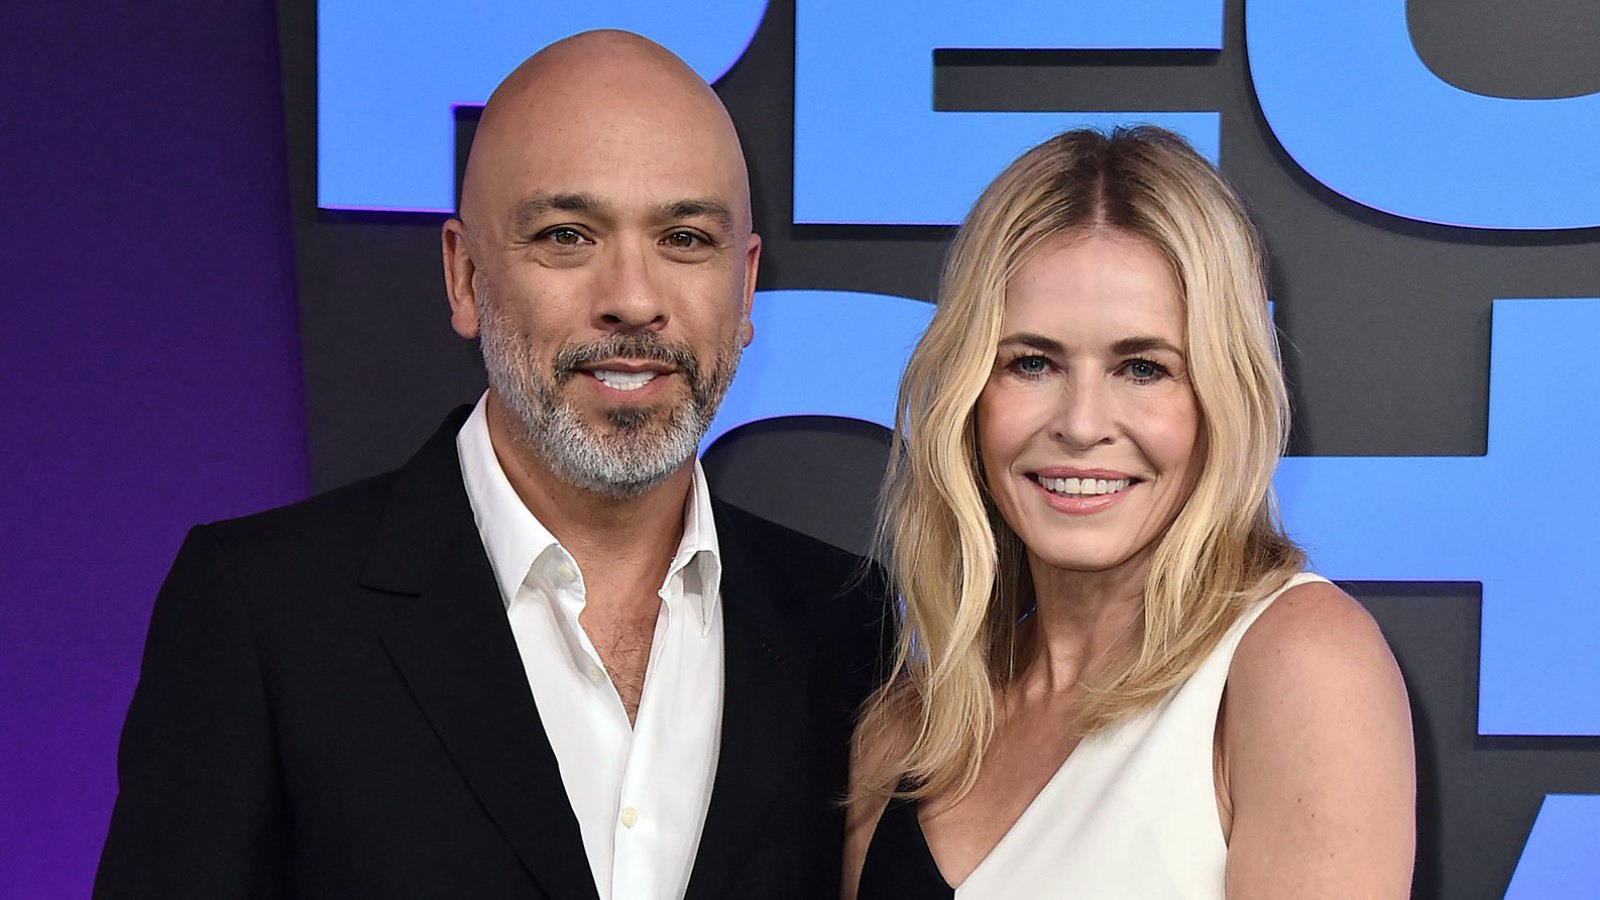 Jo Koy Says Love Is Still There With Ex Chelsea Handler After Their Split